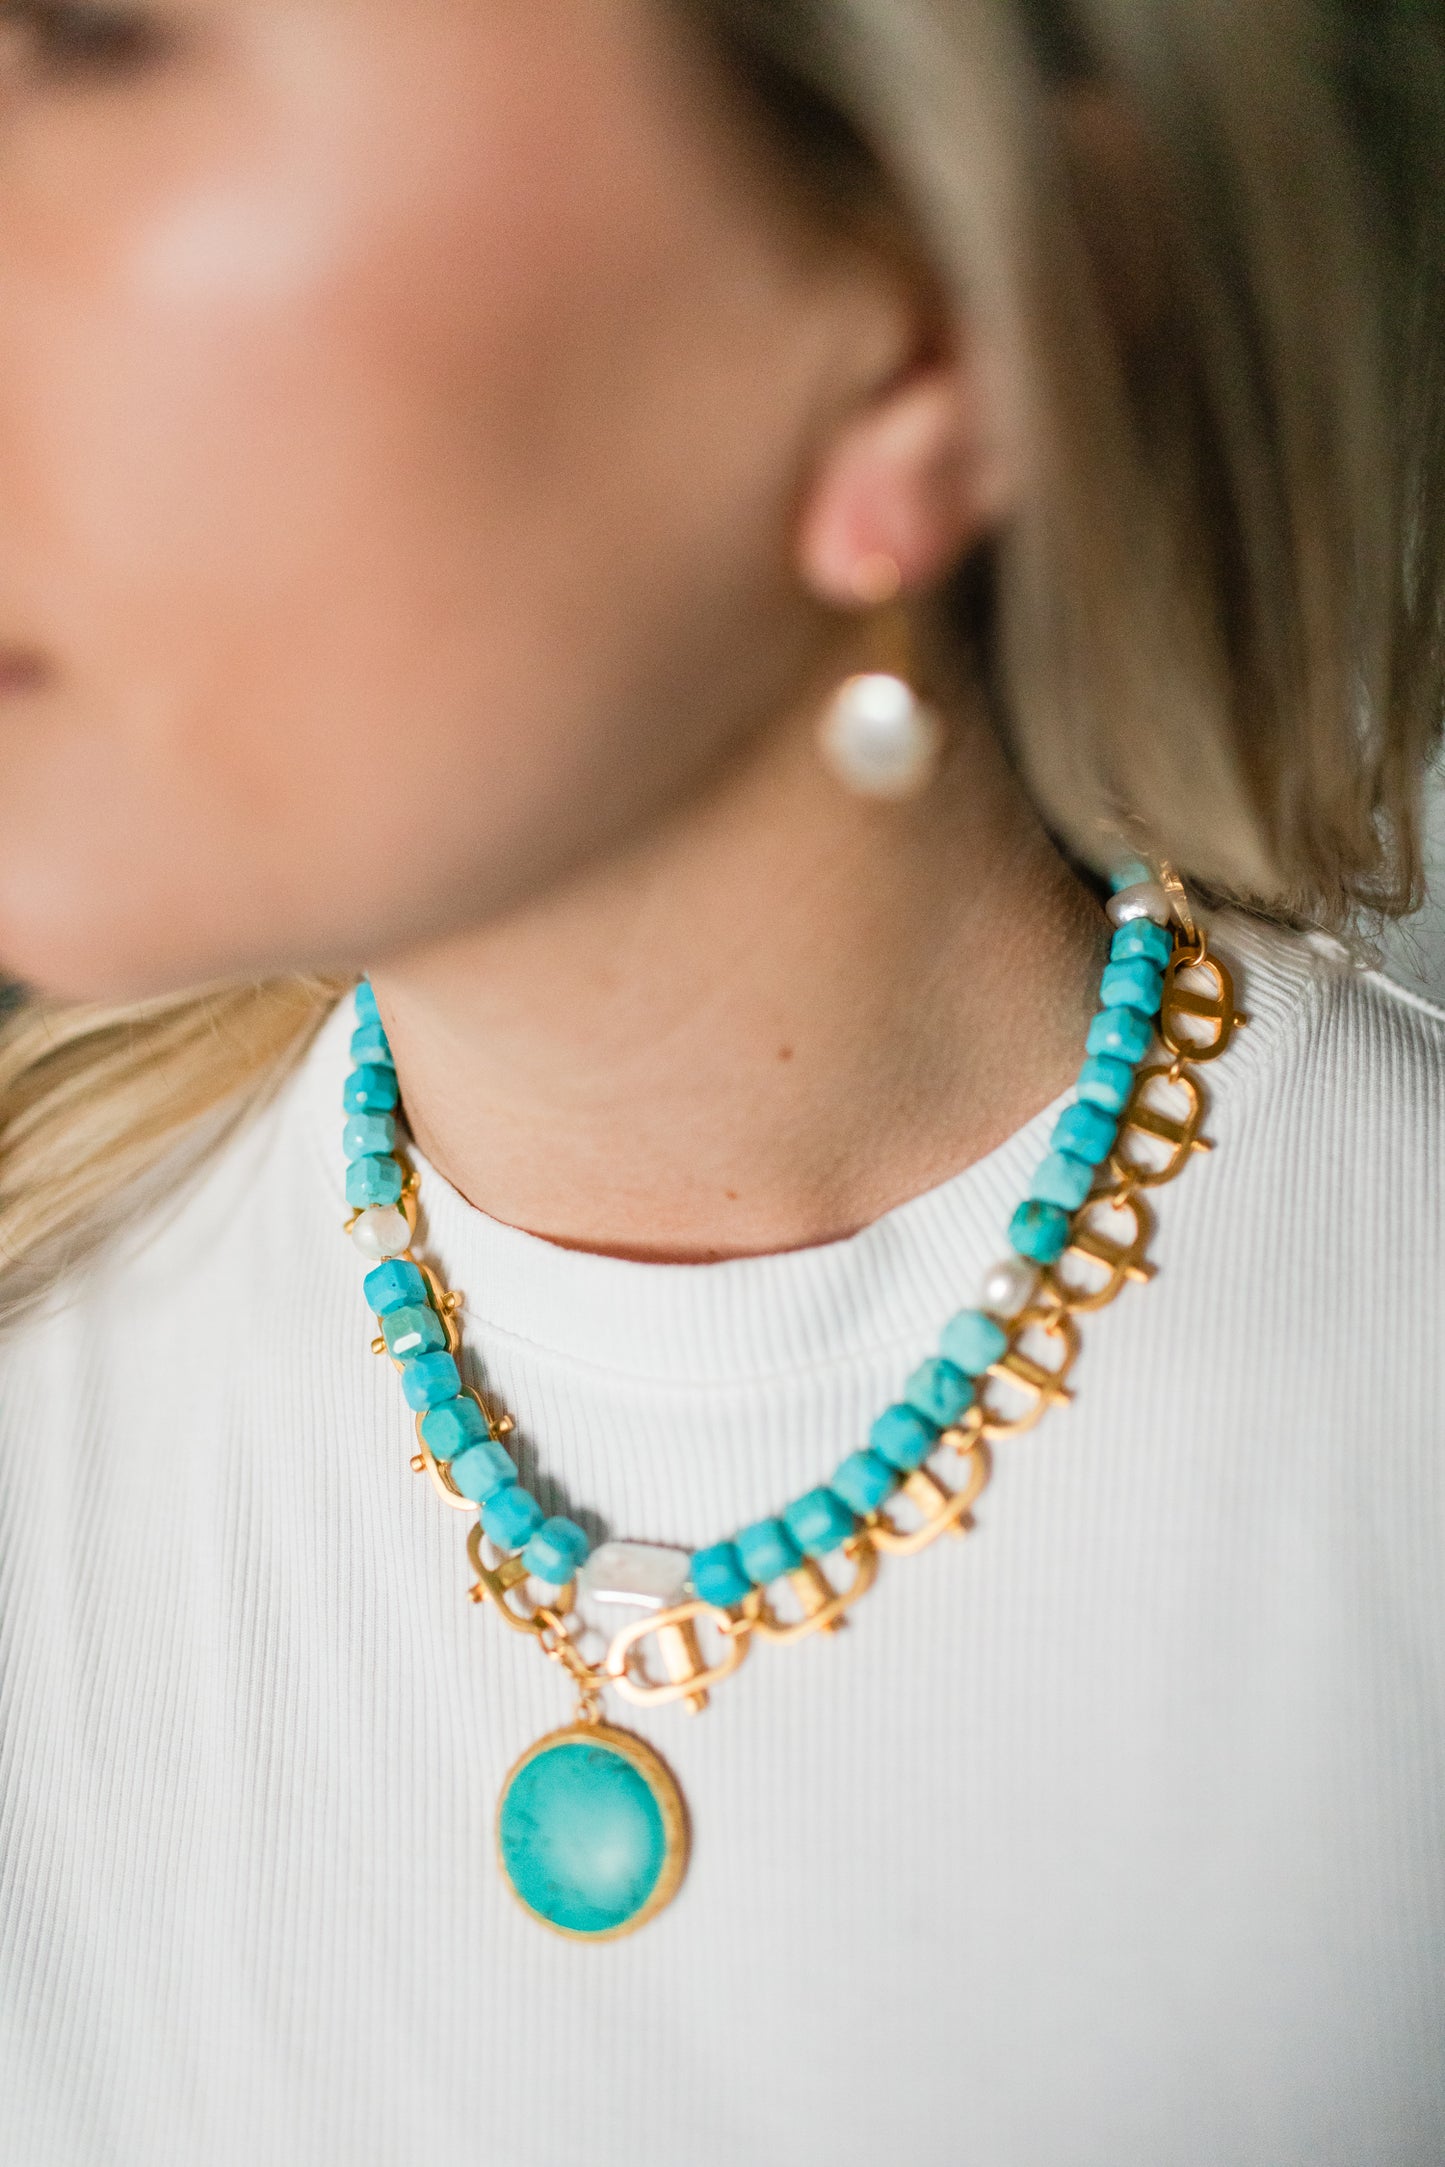 Jane necklace in turquoise